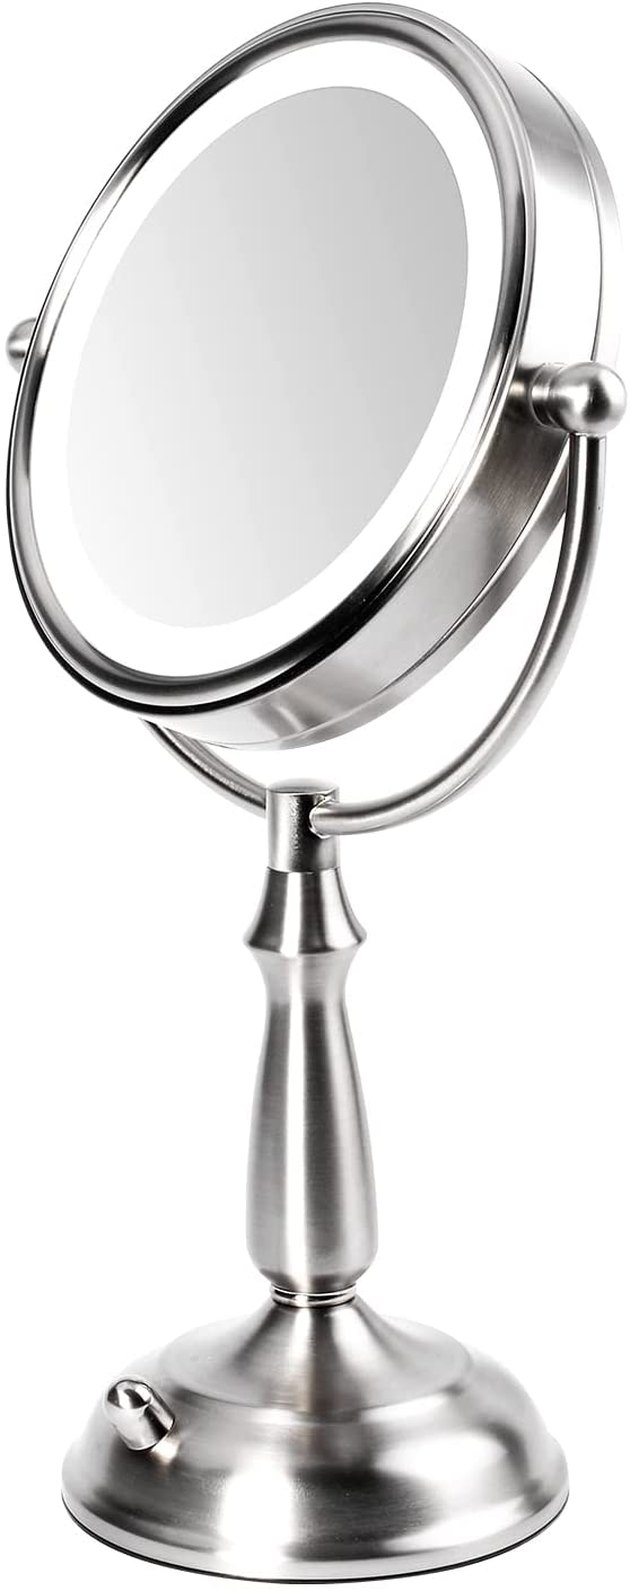 Get yourself a classic makeup mirror, complete with a magnified side, LED lights, and multiple lighting modes.